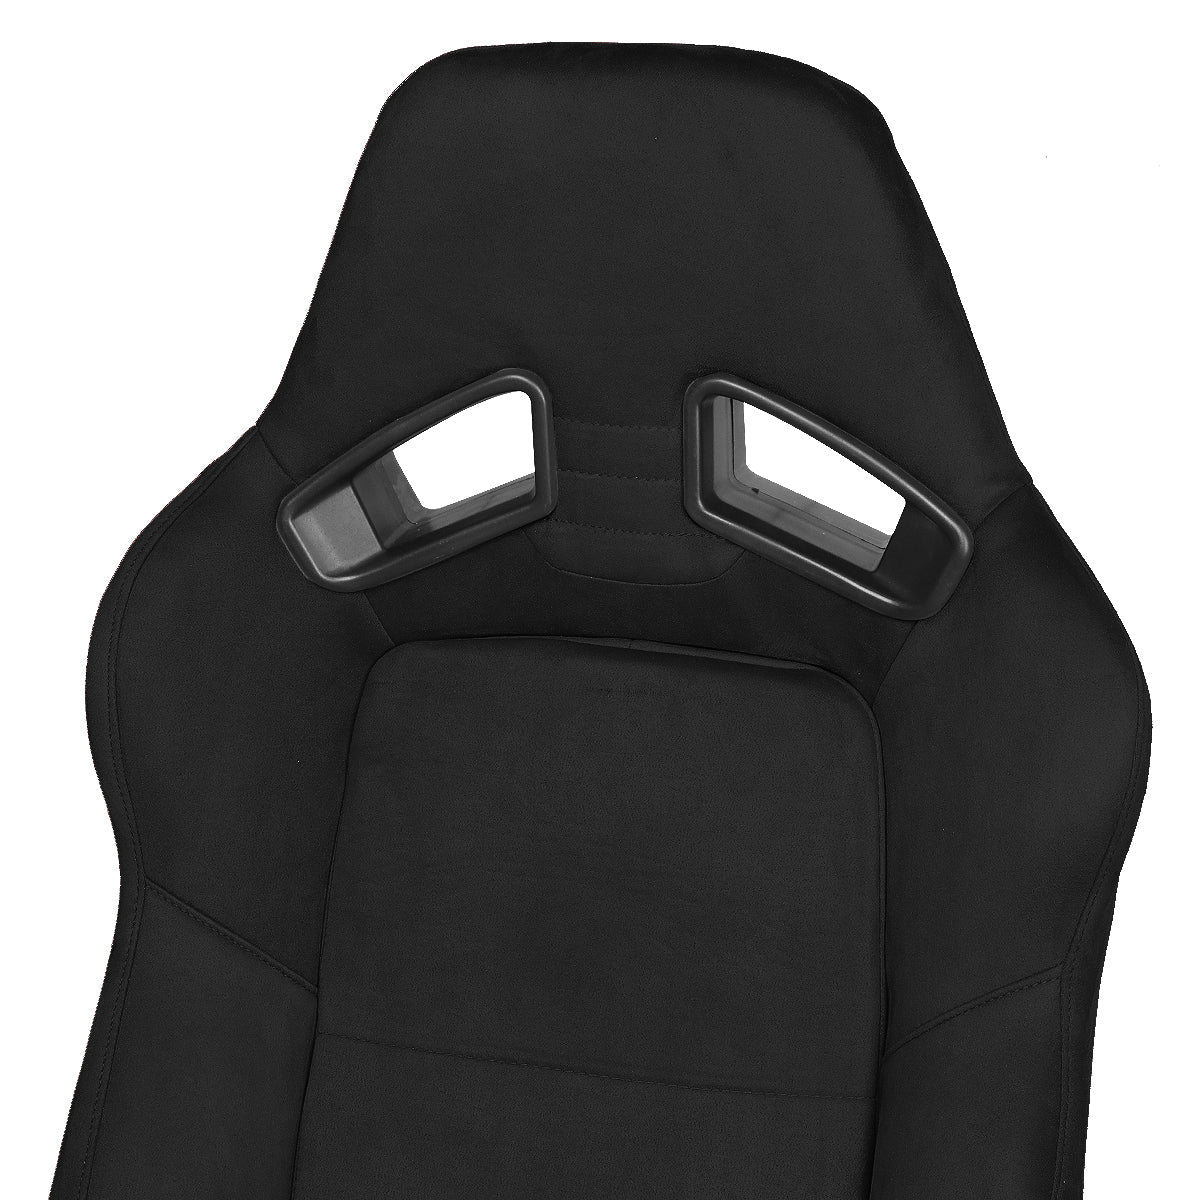 Racing Seats - Reclinable - Suede - Pair